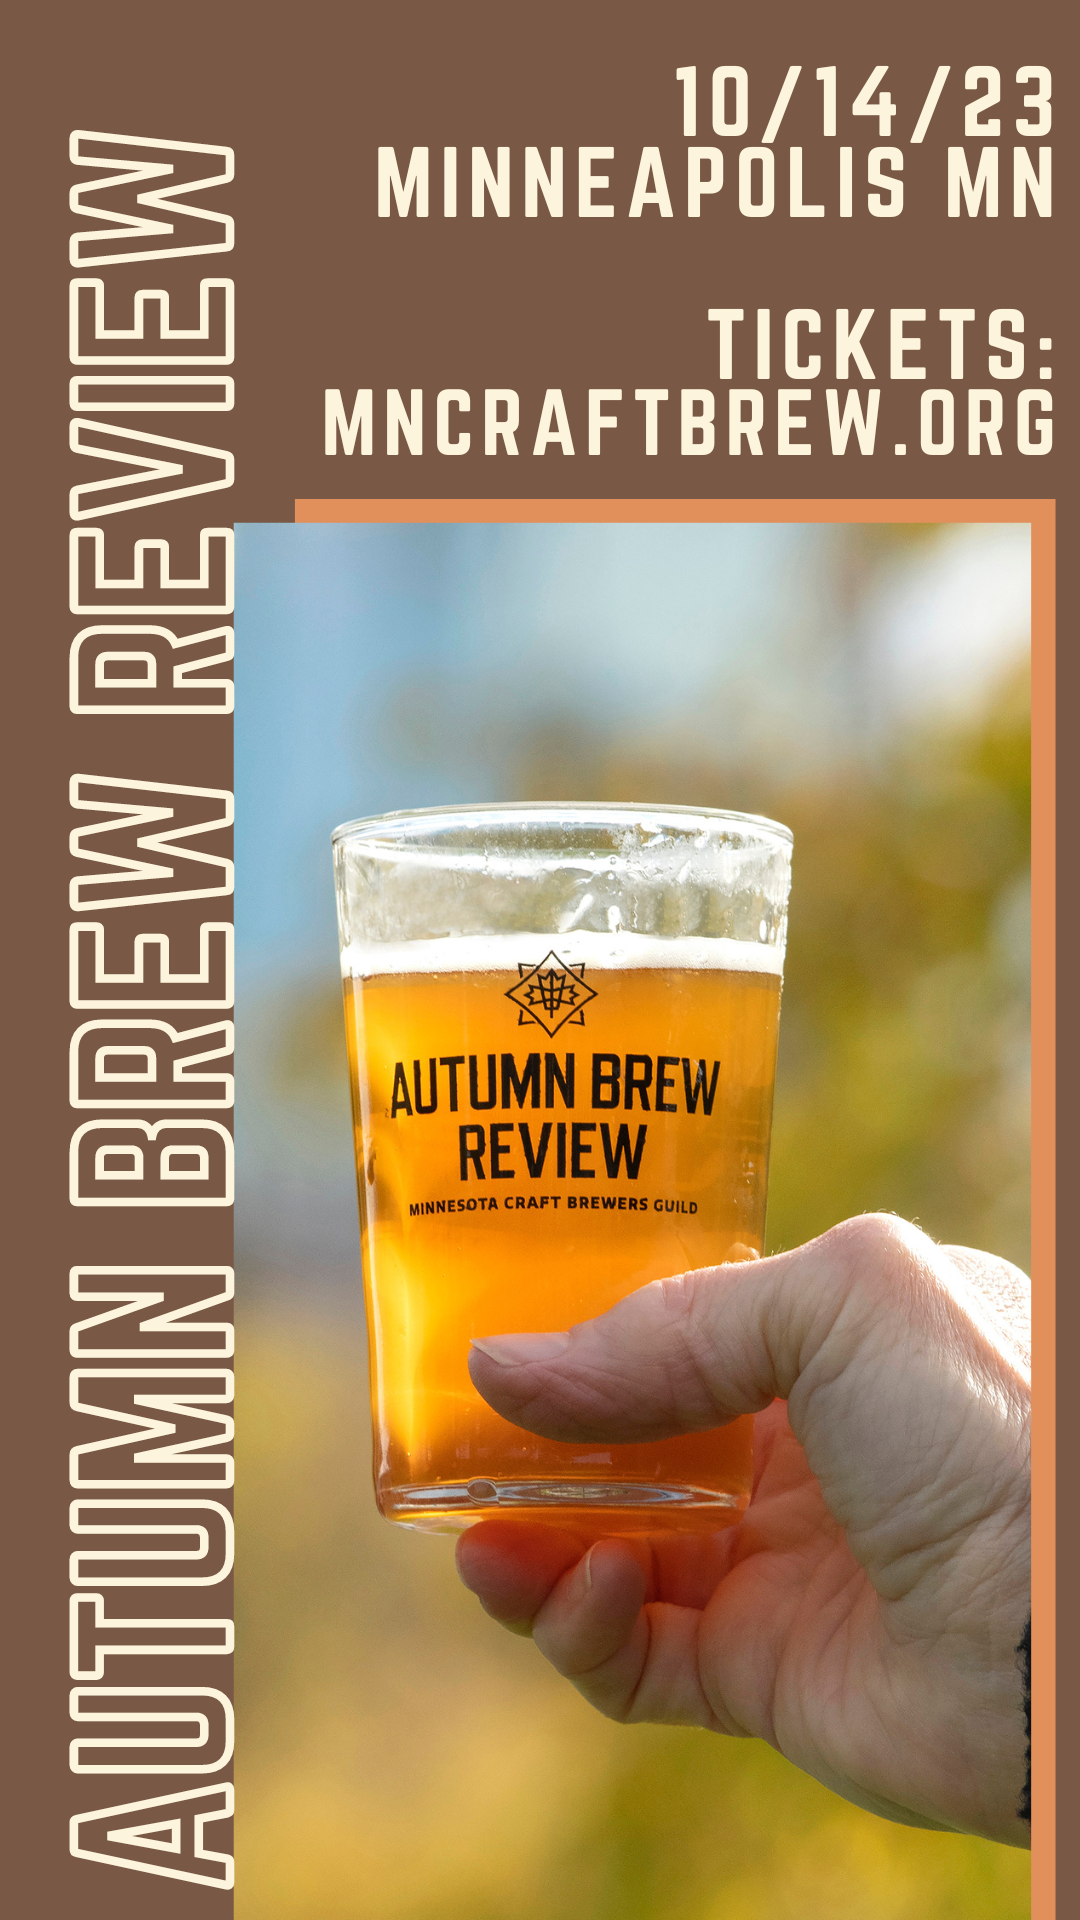 Autumn Brew Review promo image for Instagram Story